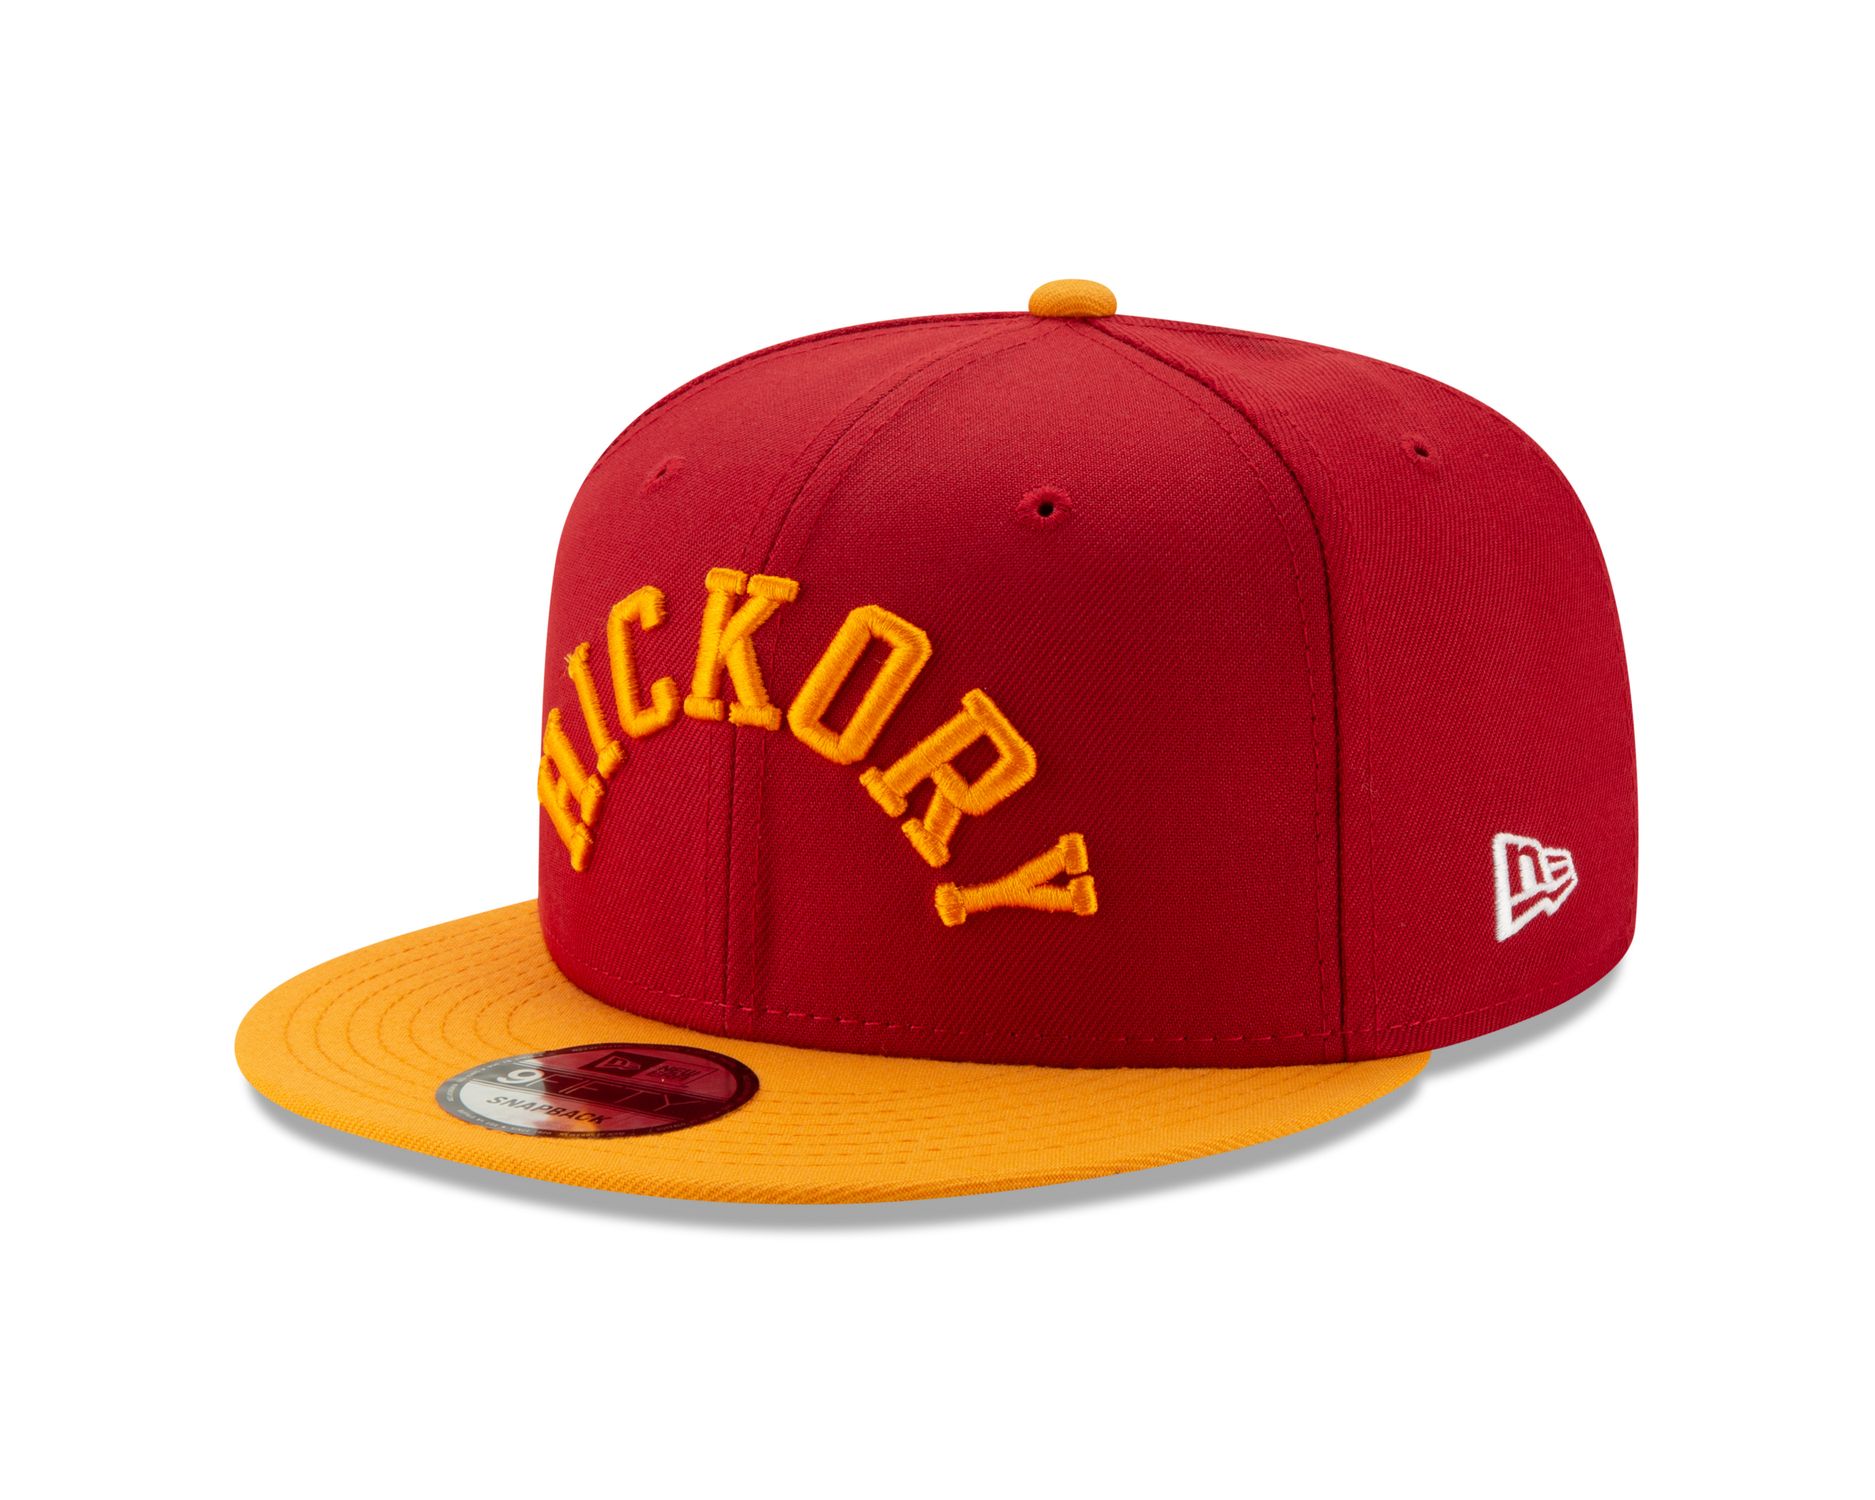 New Era Indiana Pacers Hard Wood Classic 9Fifty Cap